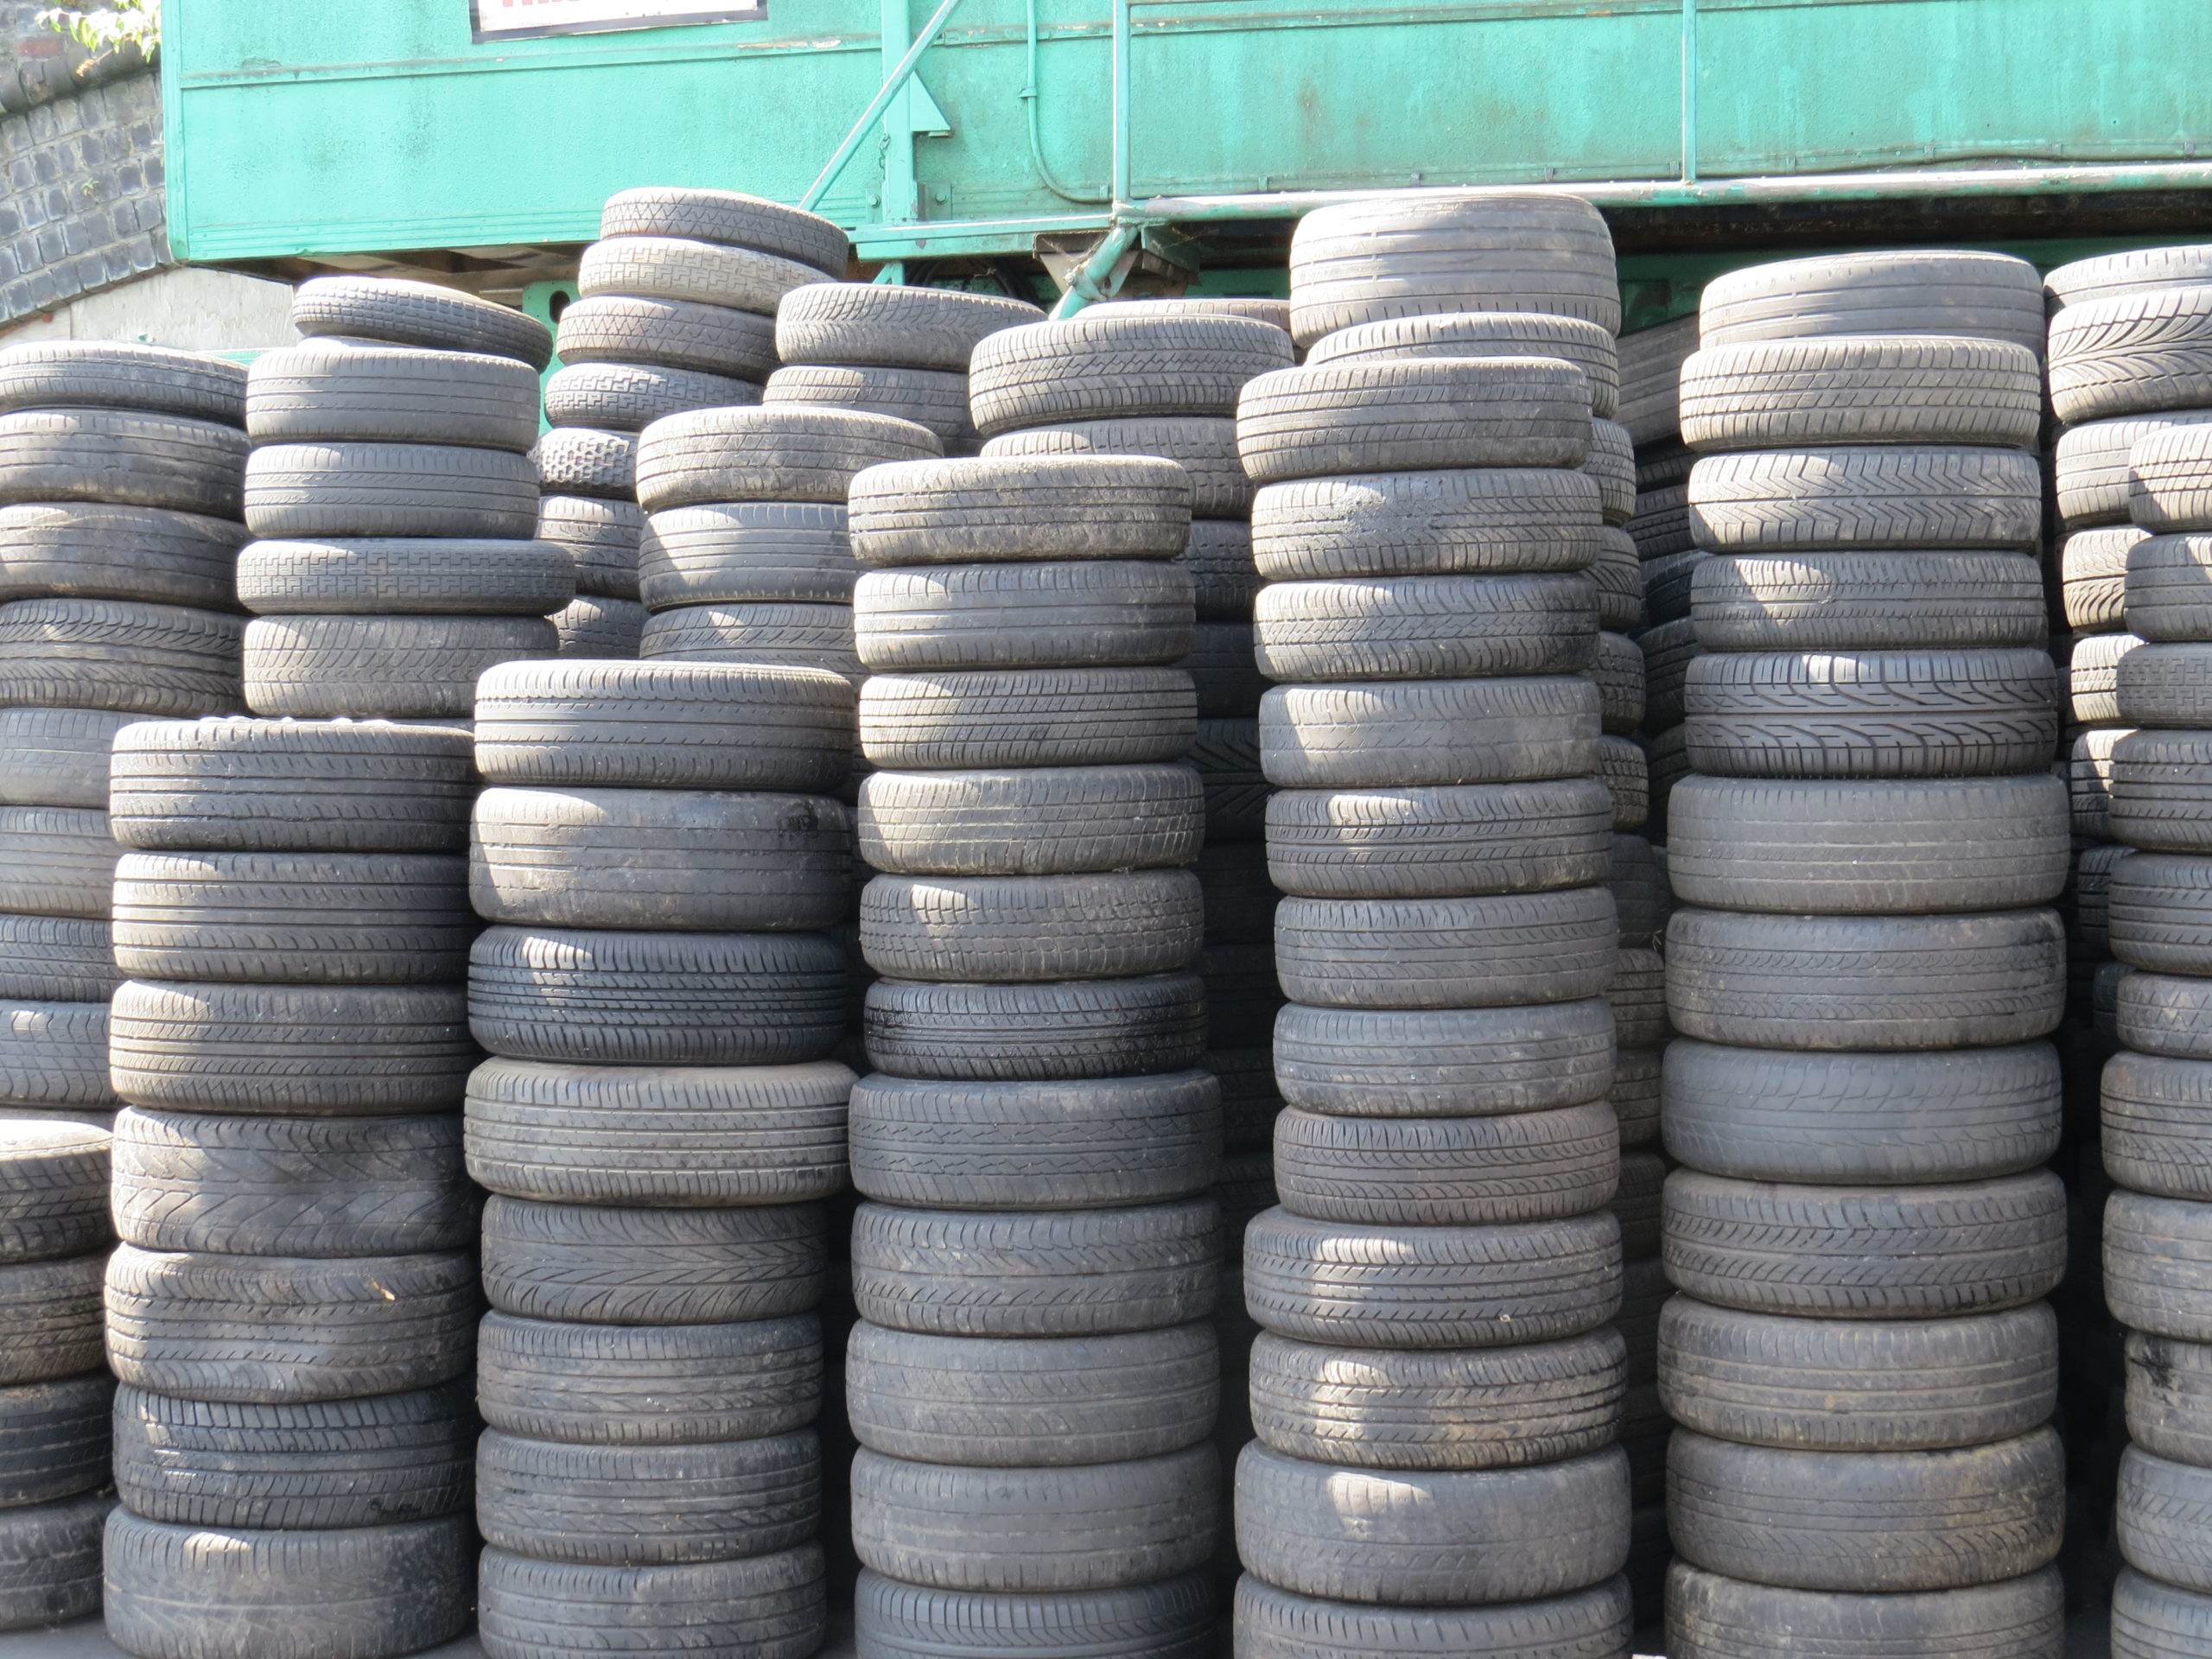 Used tyres for reuse - these help towards achieving the ELV recycling target